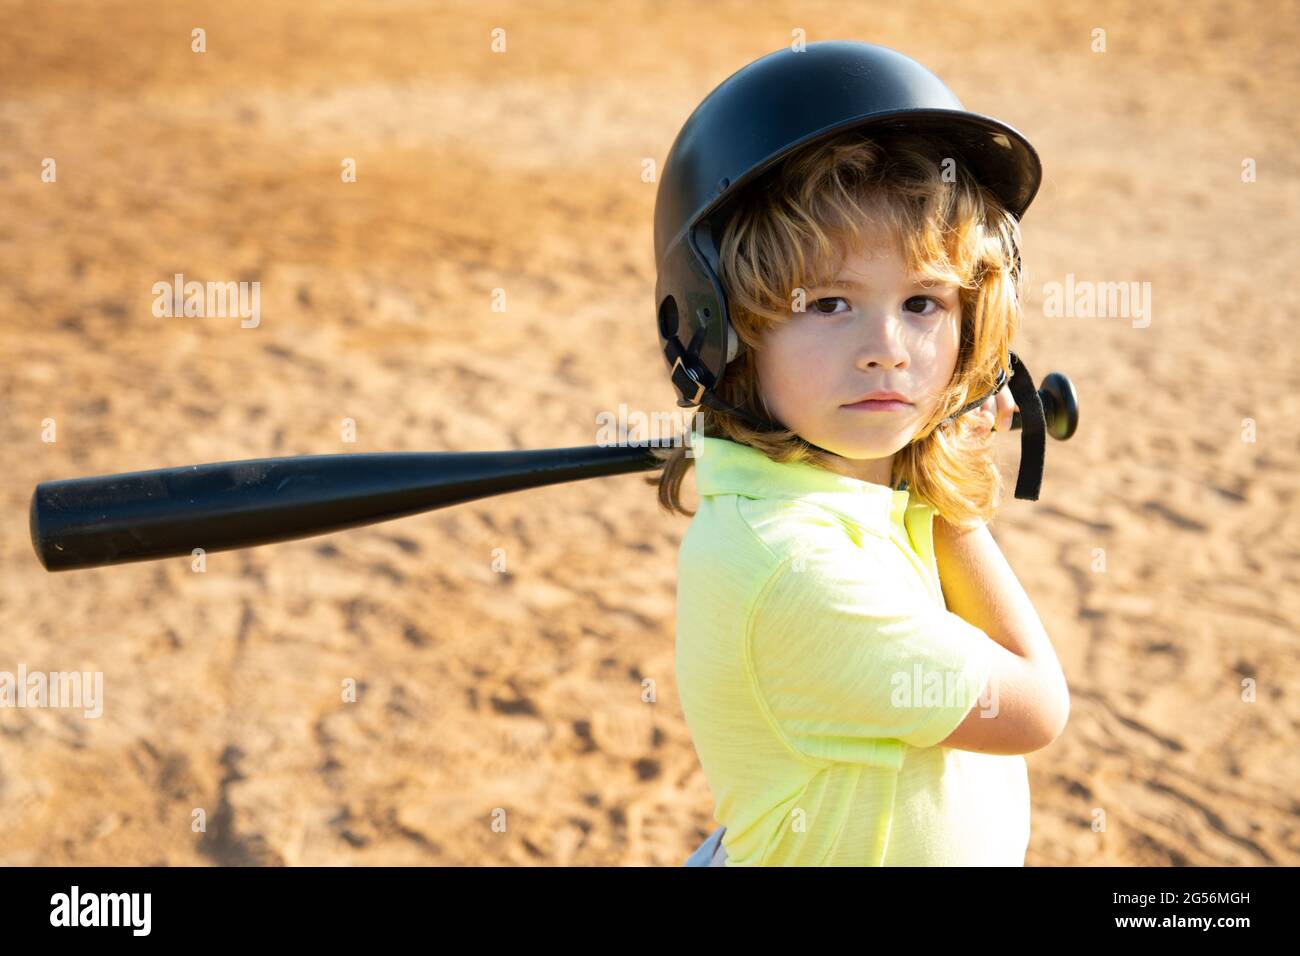 Child batter about to hit a pitch during a baseball game. Kid baseball  ready to bat Stock Photo - Alamy